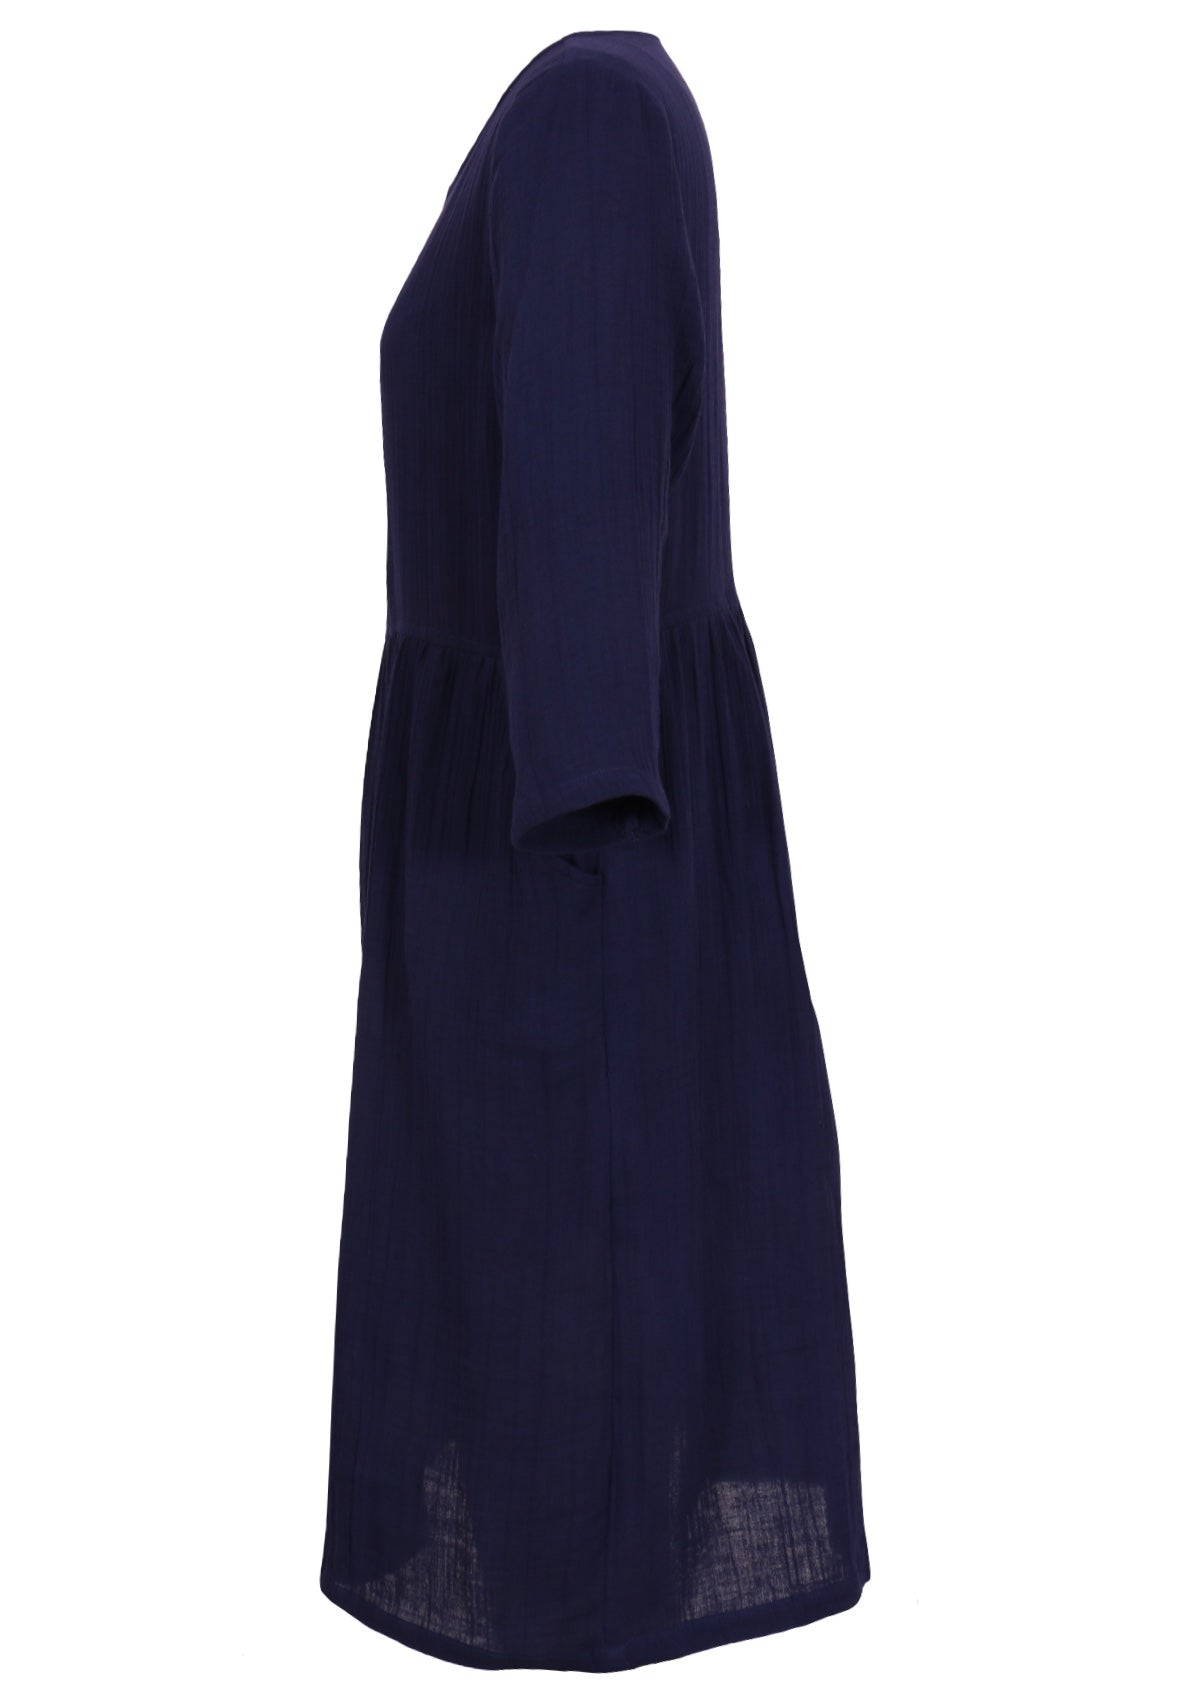 Double layer of cotton gauze relaxed fit dress in deep blue